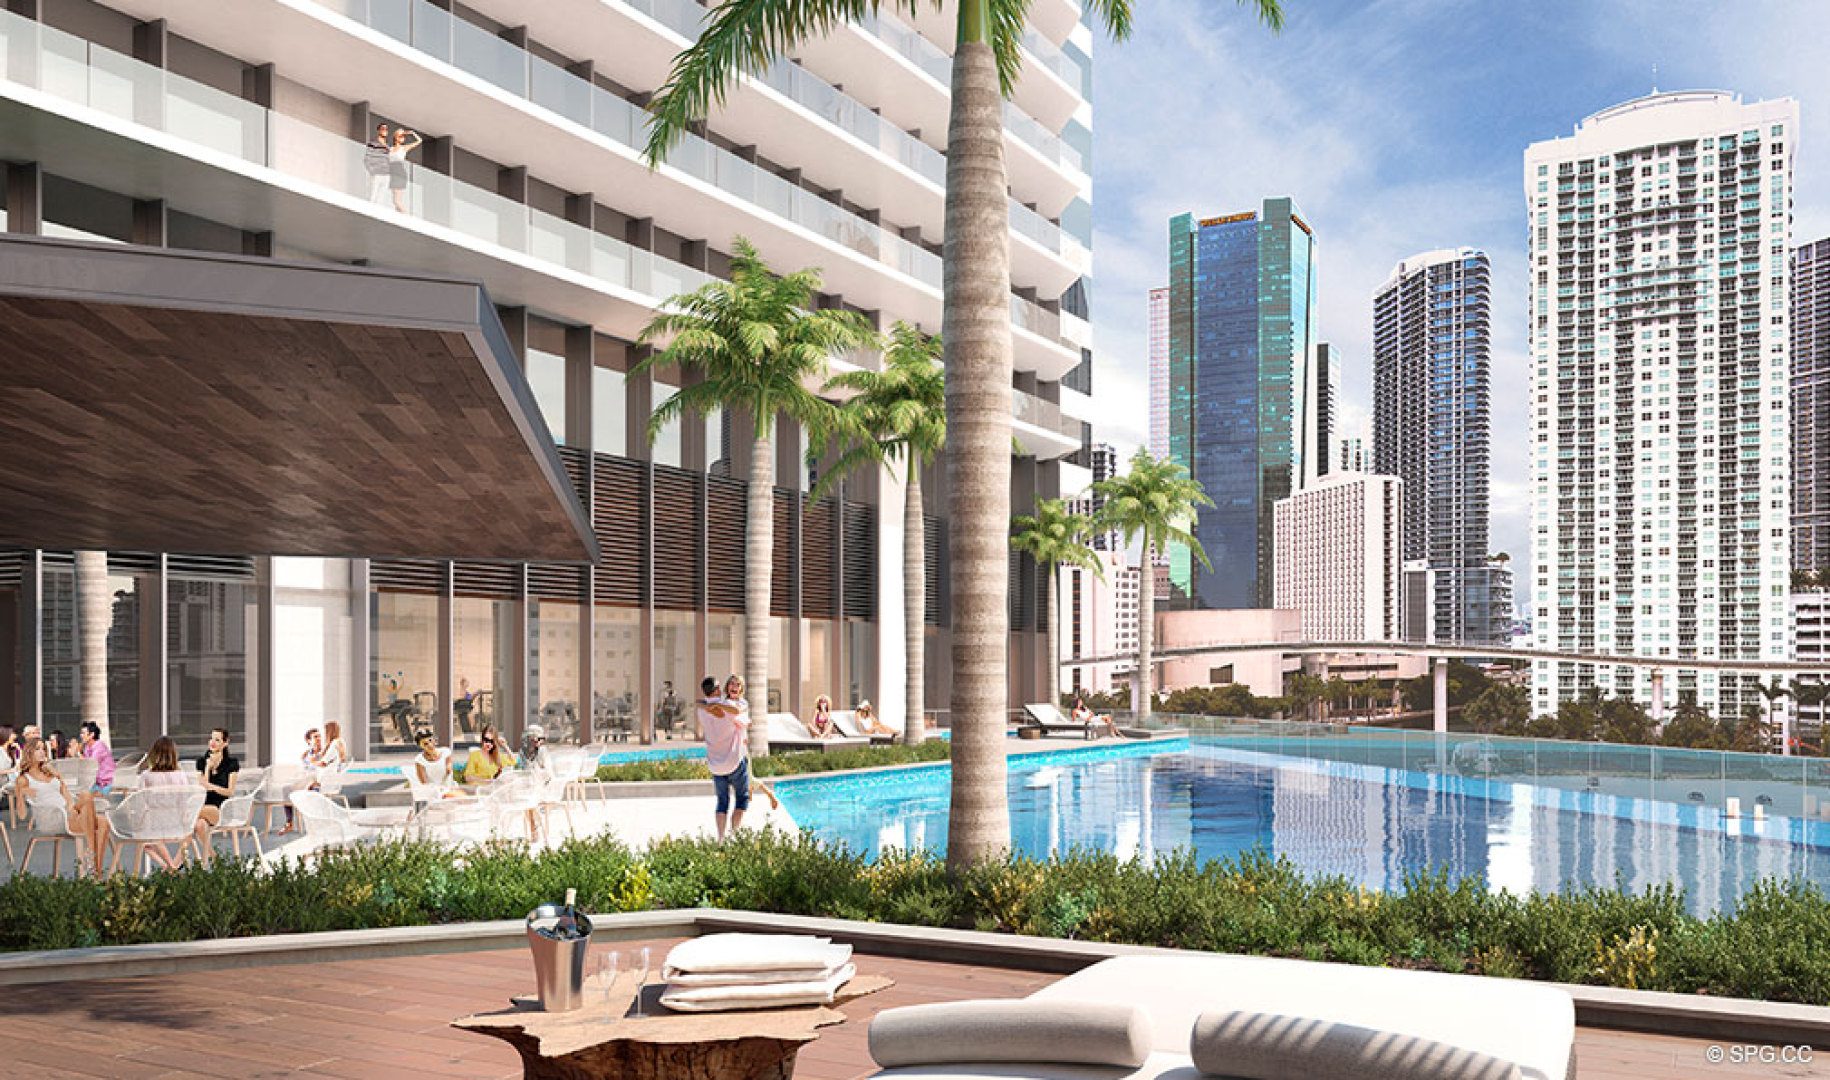 Pool Area at One River Point, Luxury Waterfront Condos in Miami, Florida 33130